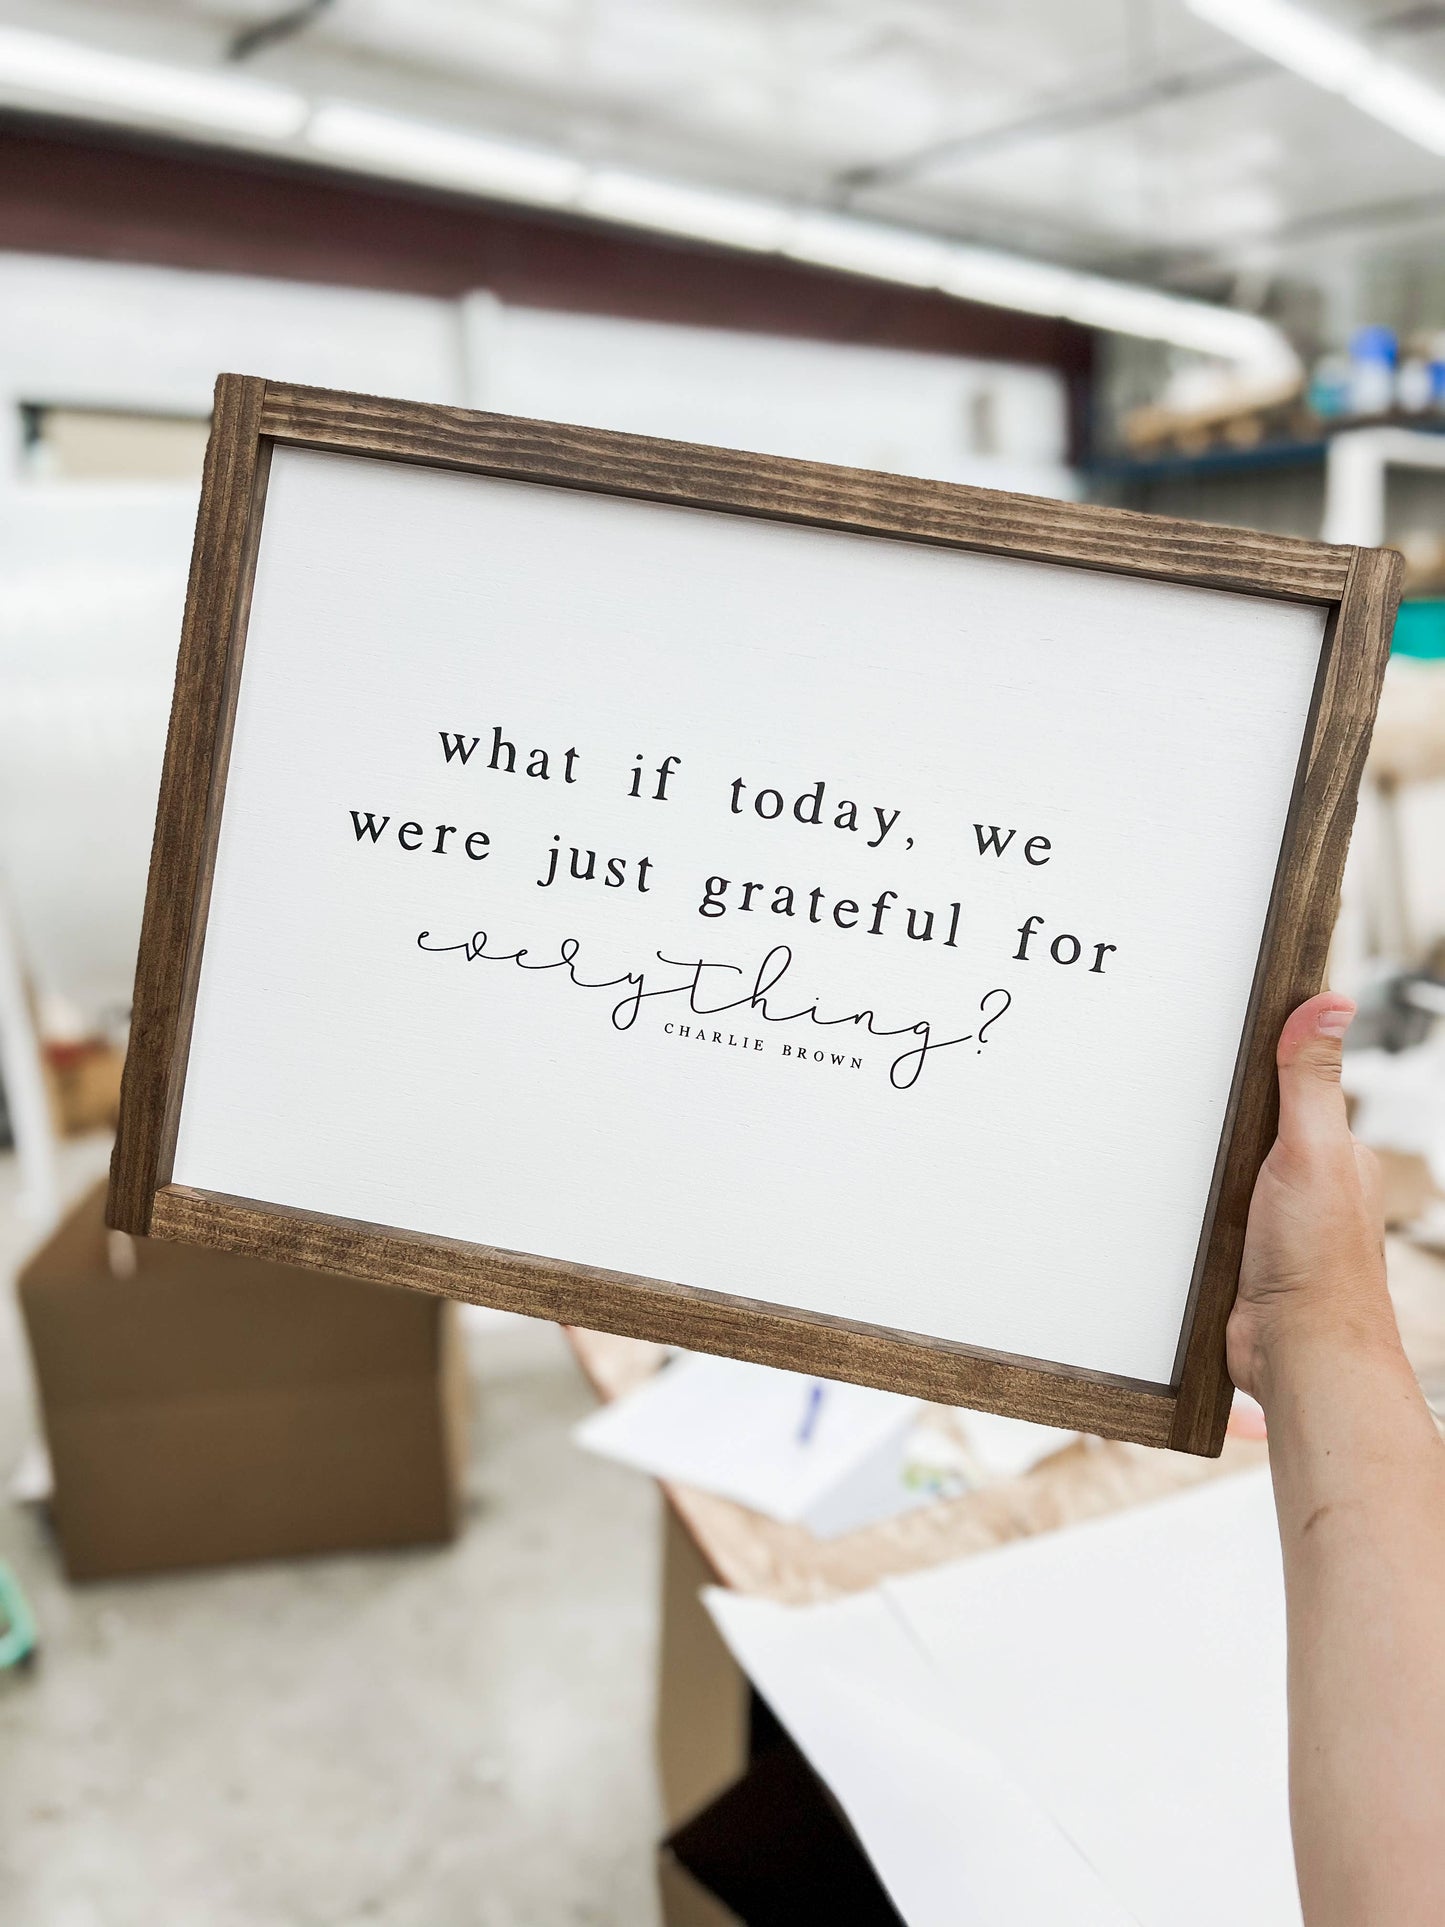 What If Today, We Were Just Grateful